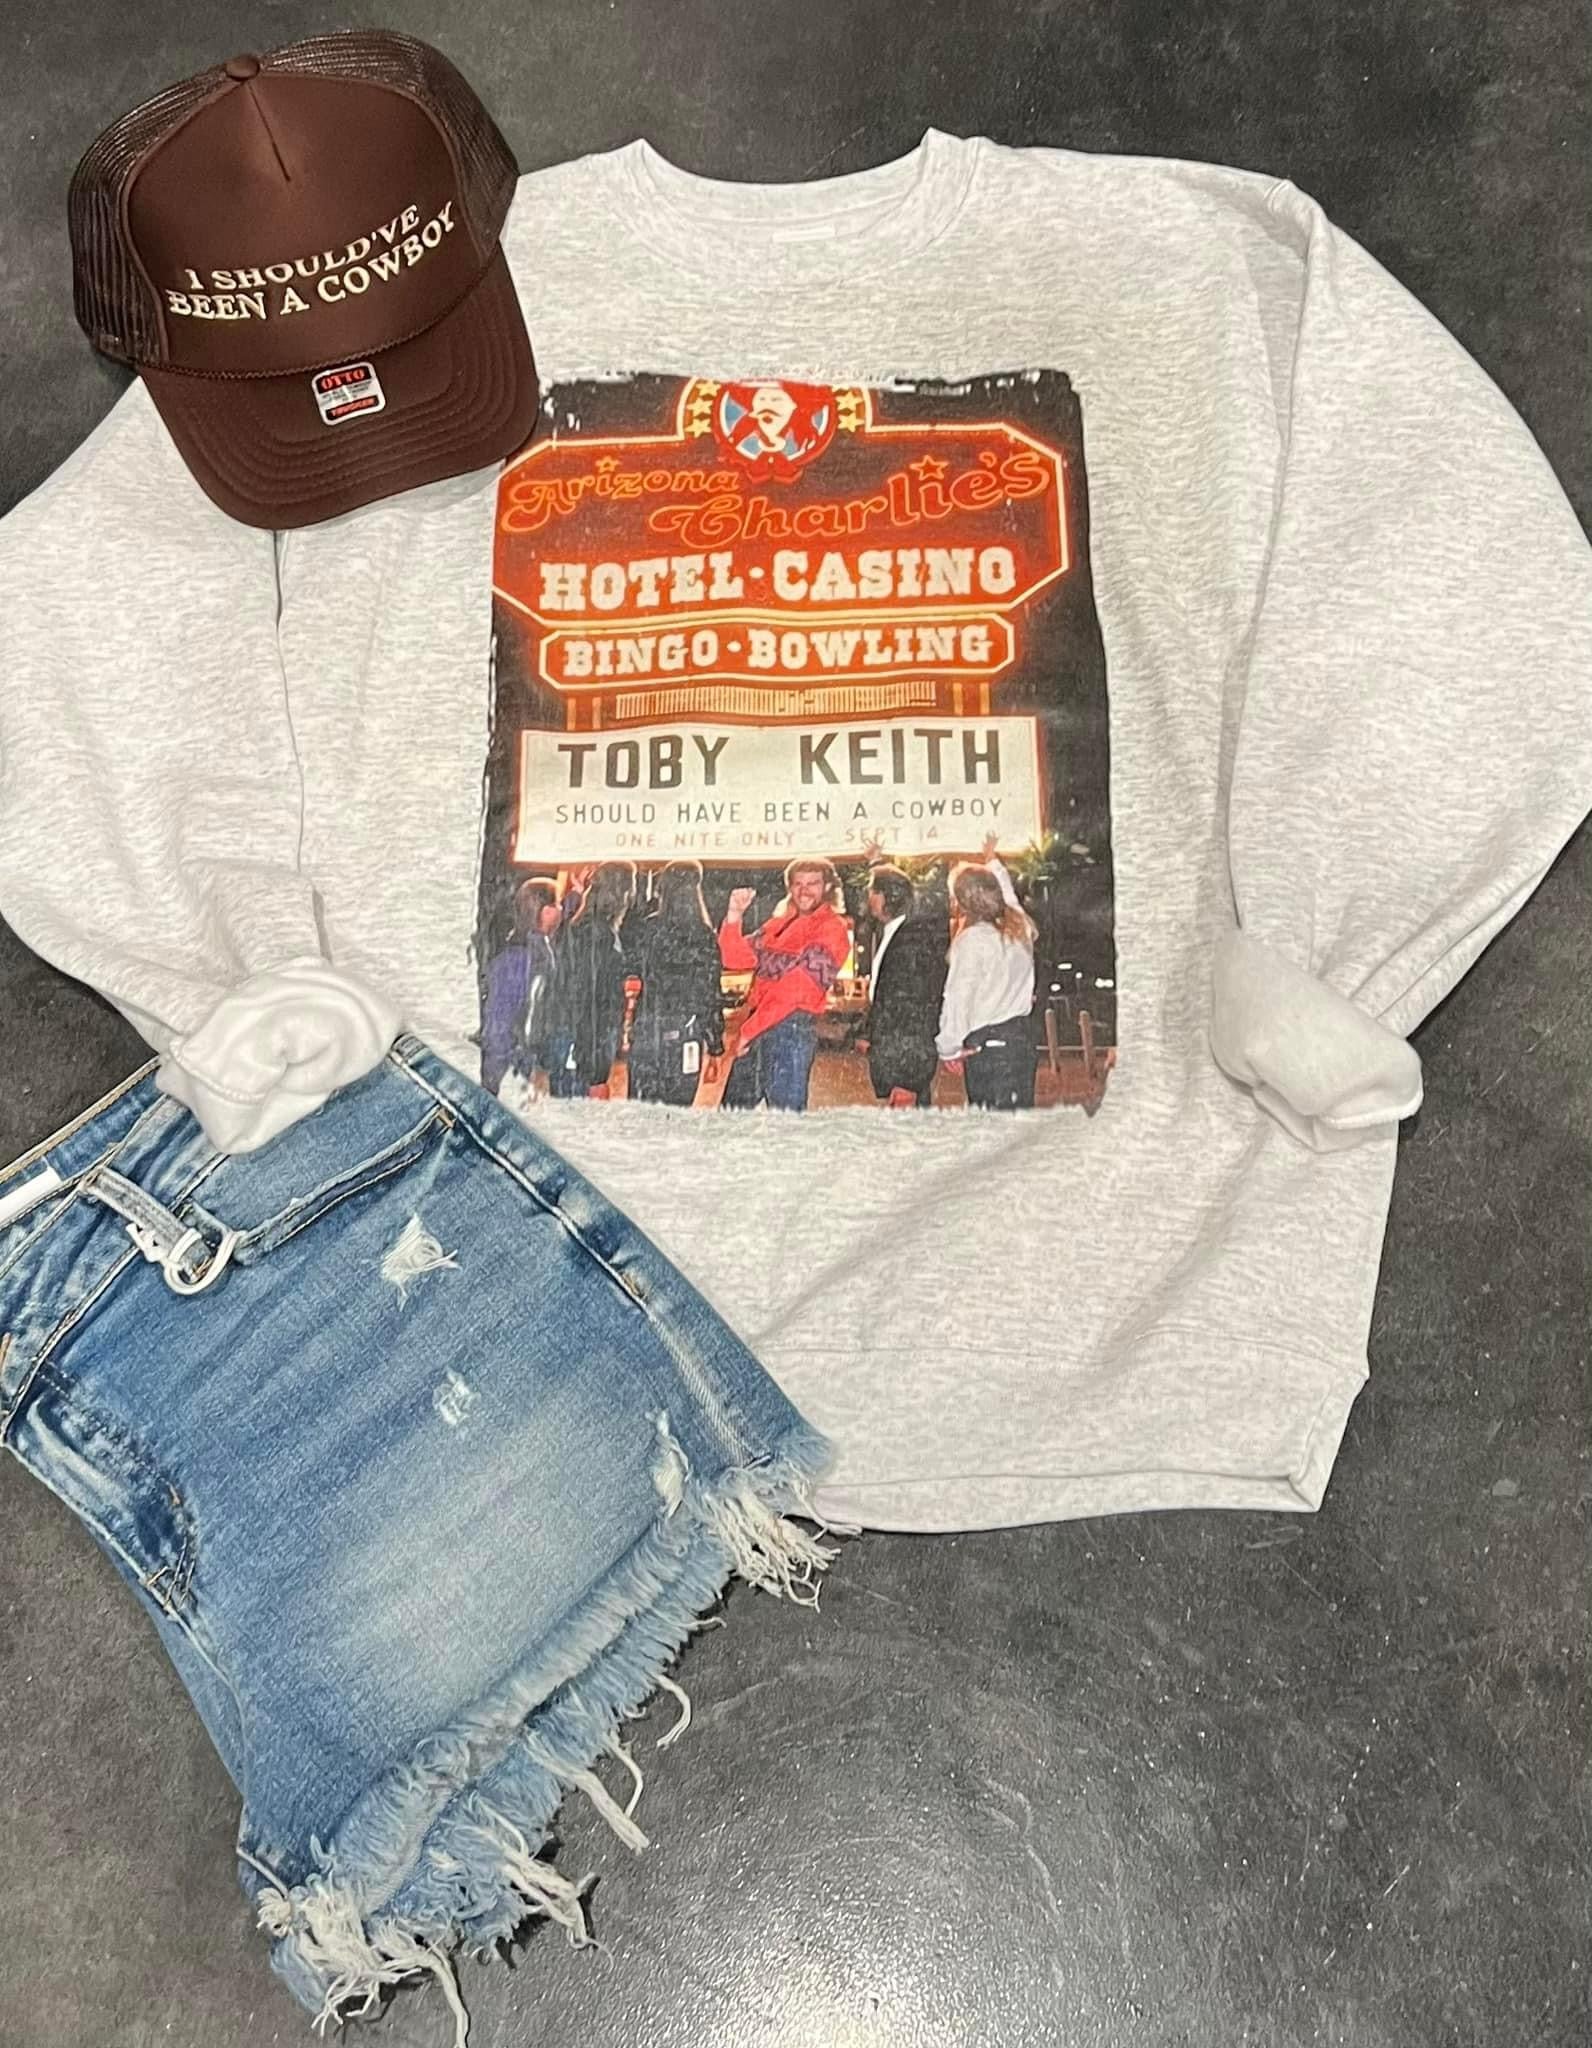 TOBY KEITH LIVE ONE NITE ONLY